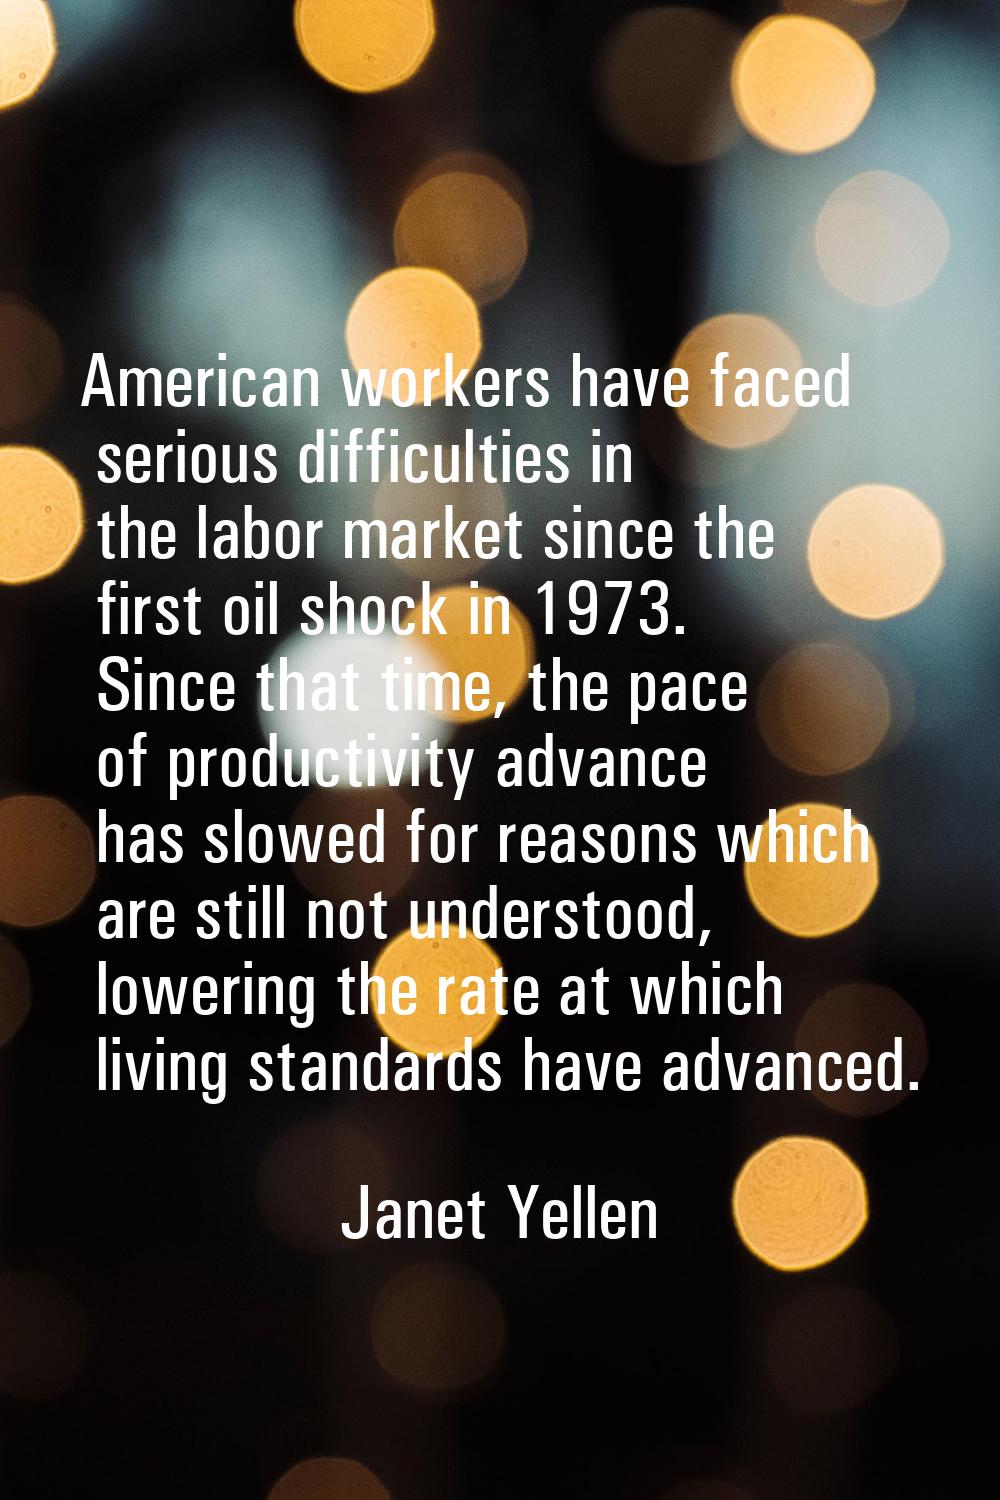 American workers have faced serious difficulties in the labor market since the first oil shock in 1